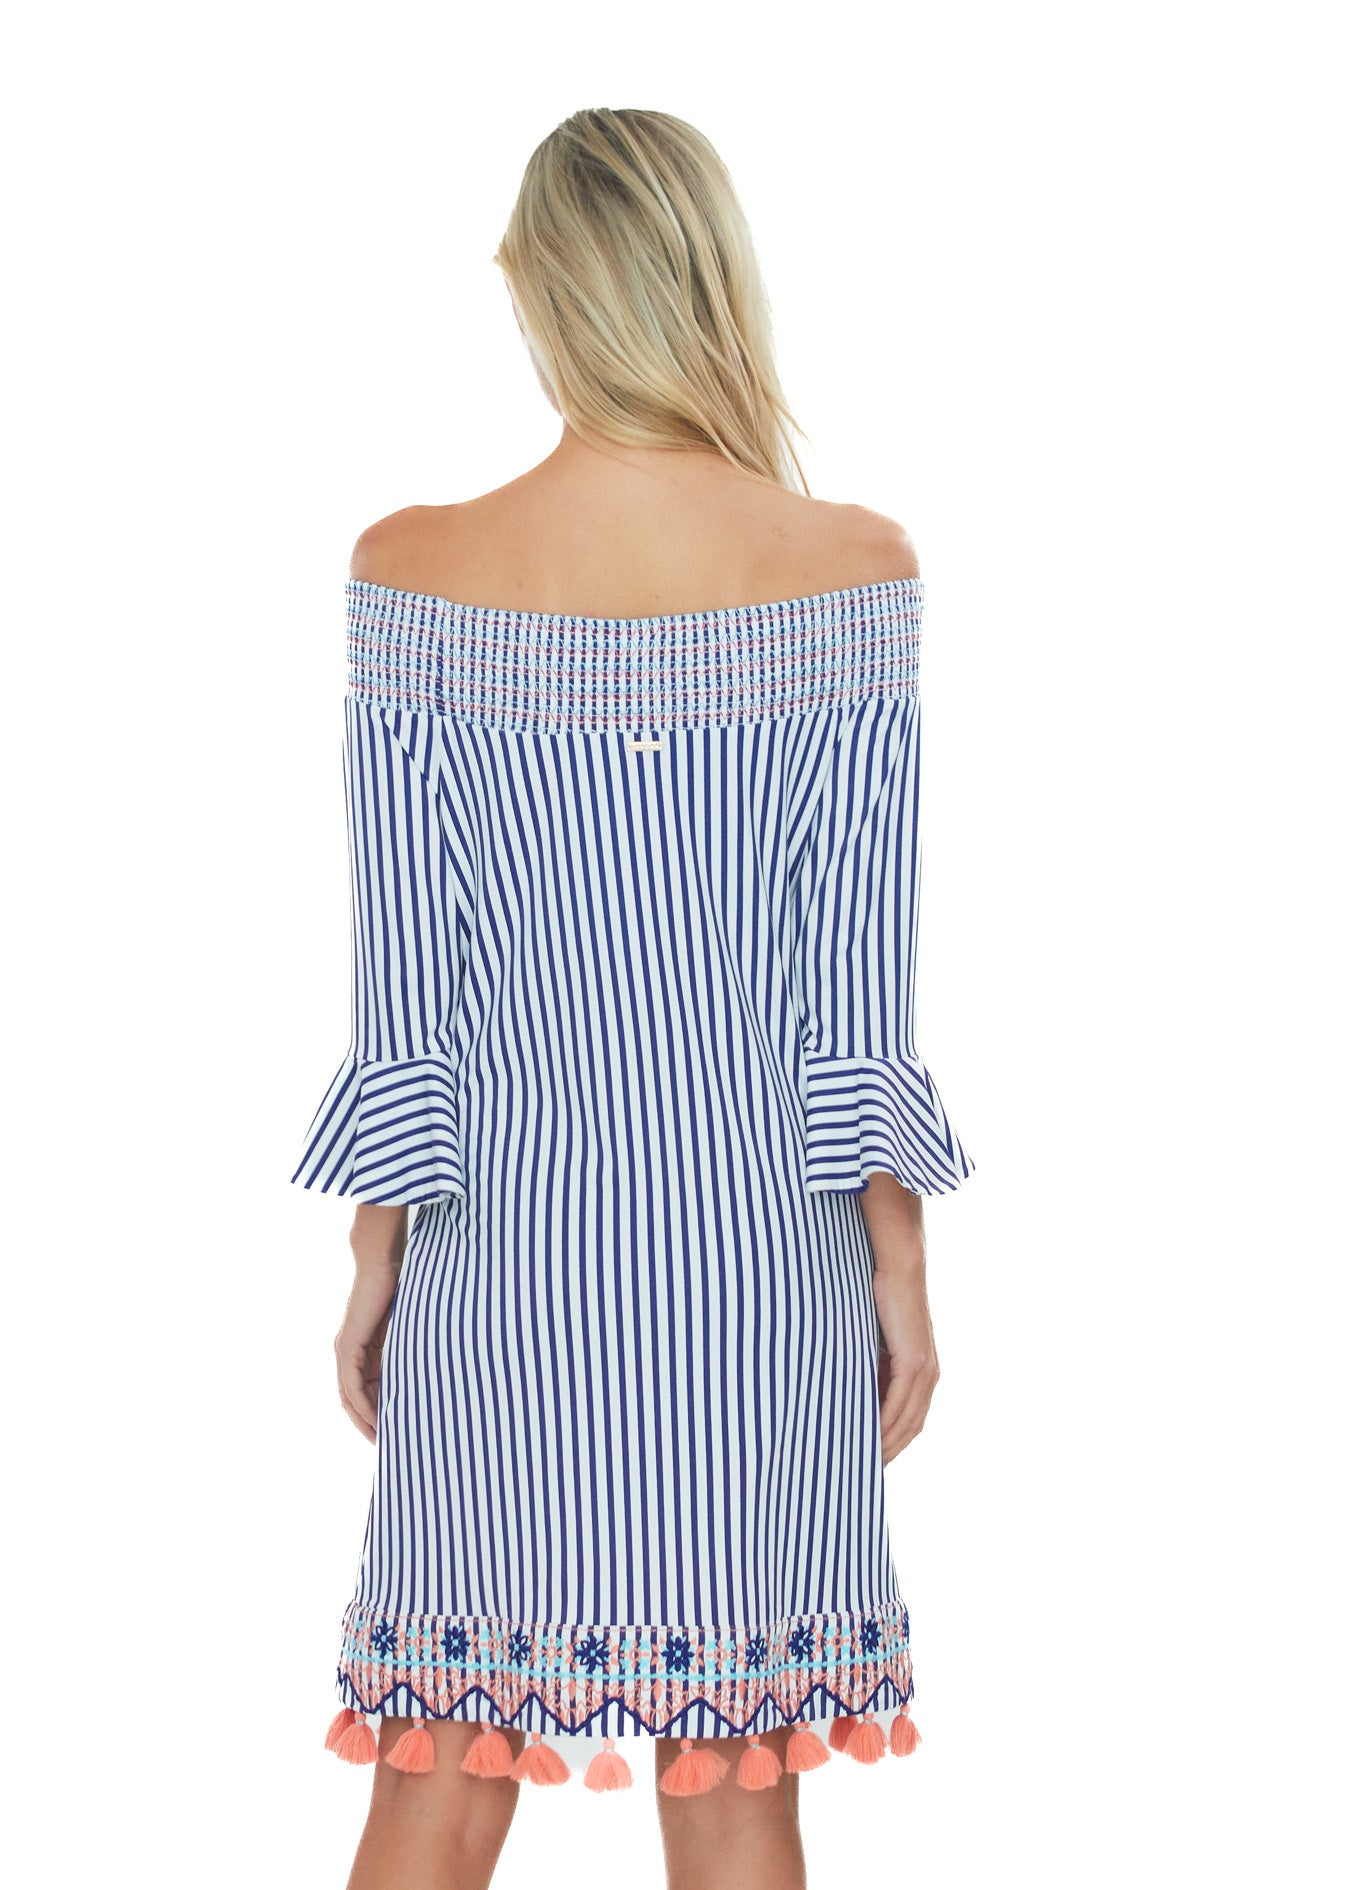 Back of blonde woman wearing the St. Barts Off the Shoulder Dress in front of white background.